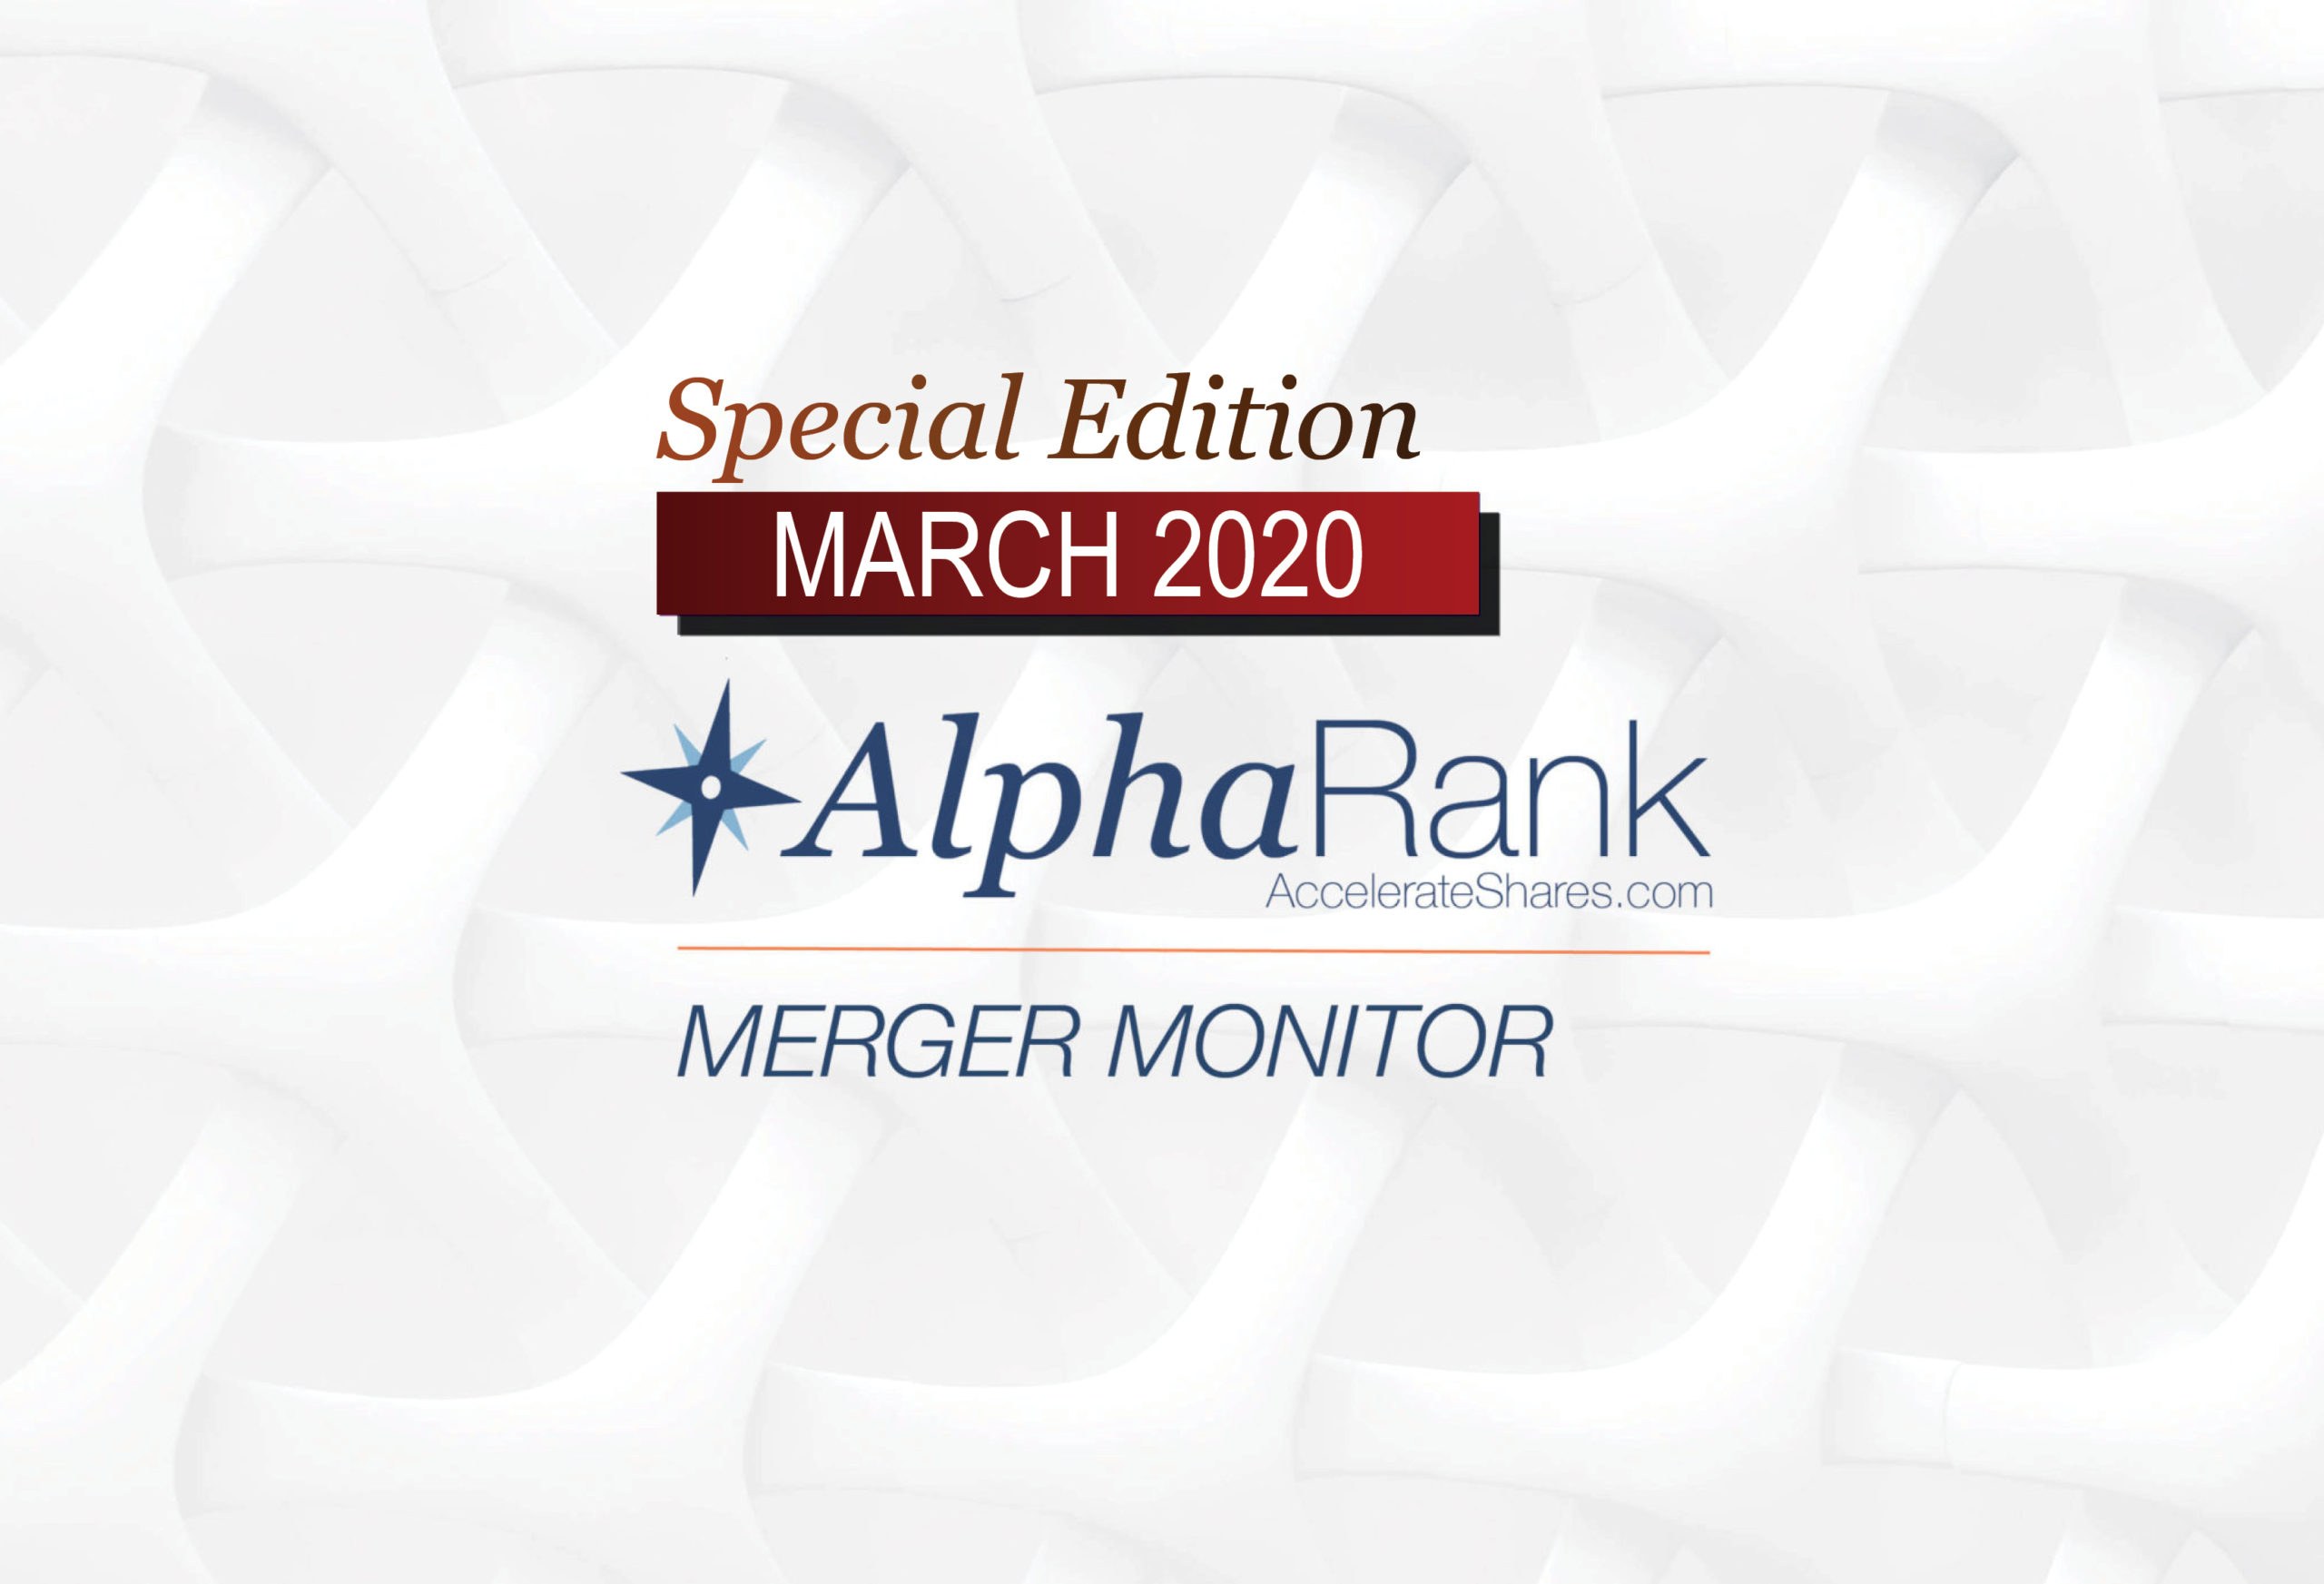 Special Edition of AlphaRank Merger Monitor – March 2020